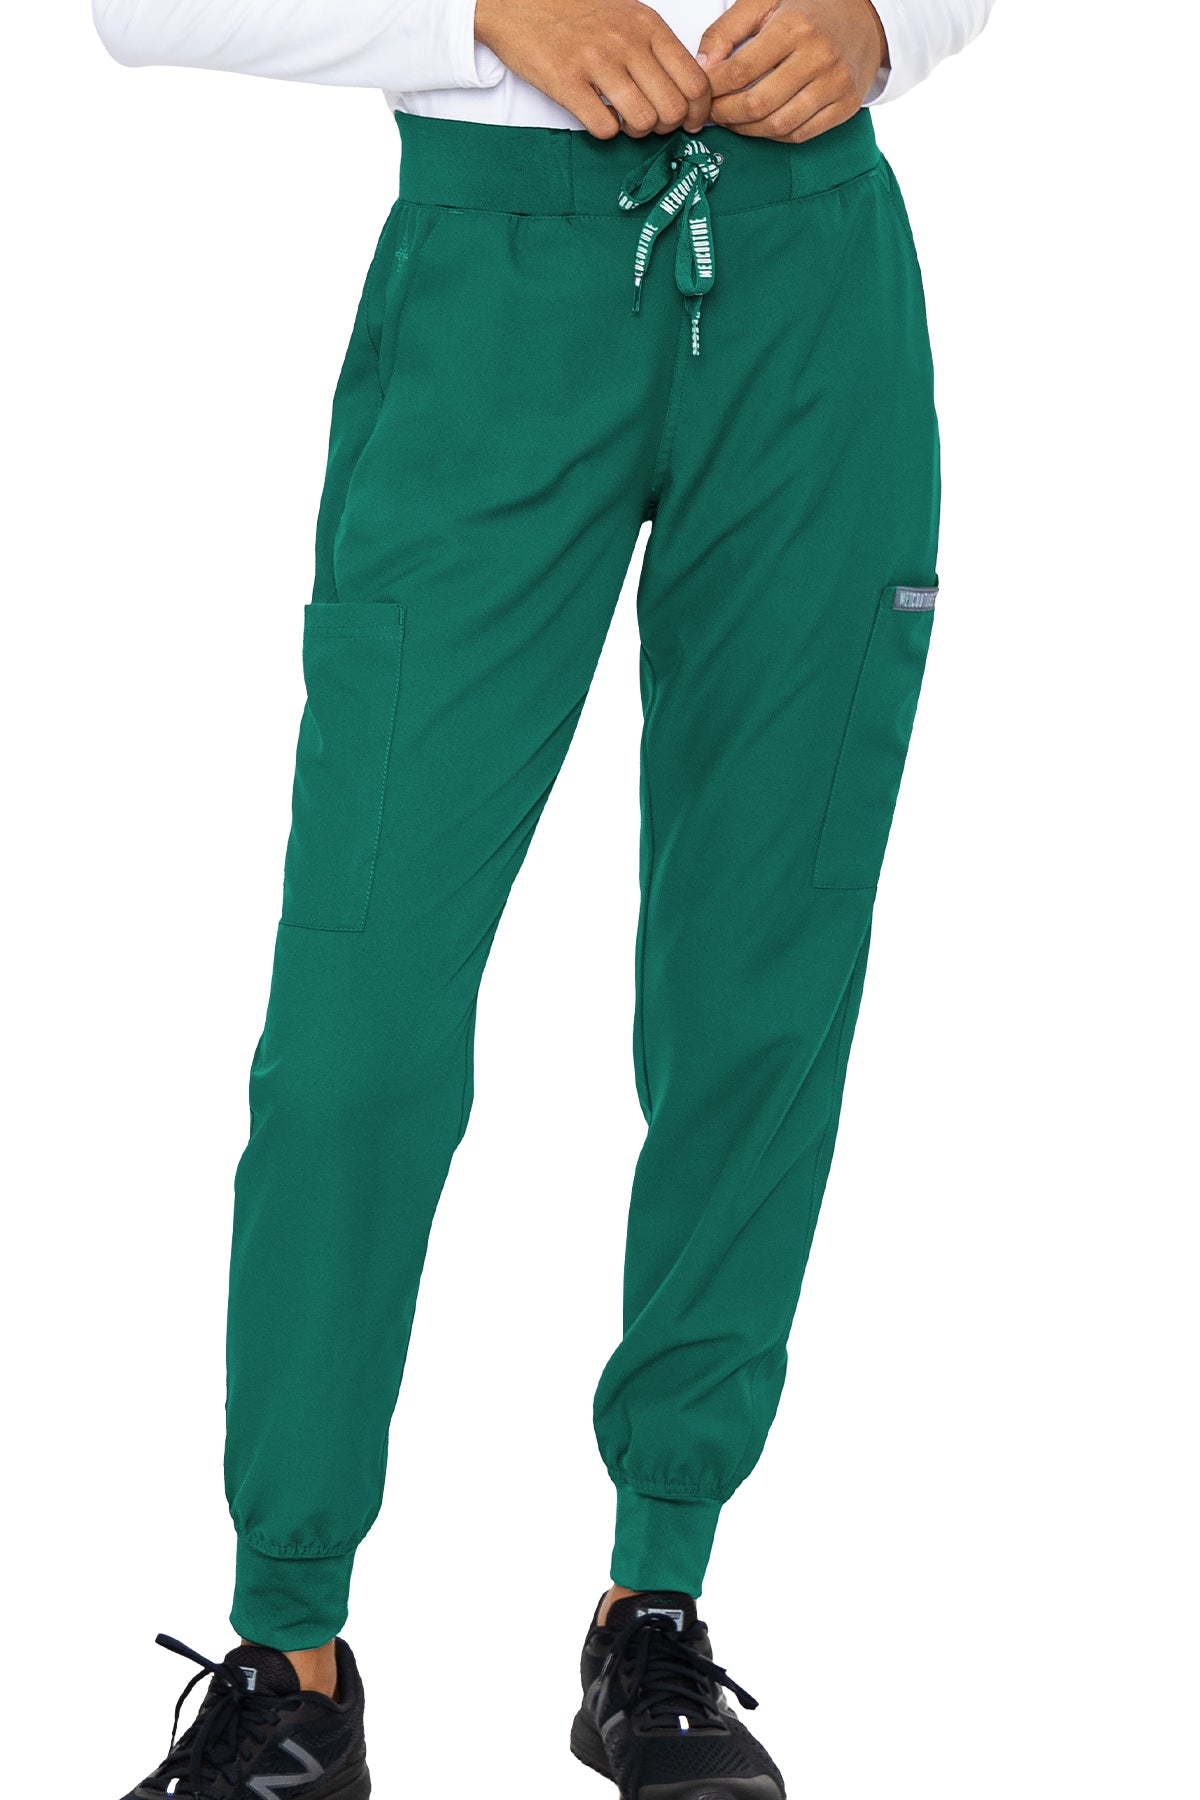 Med Couture 2711 Insight Jogger Pant Hunter Green